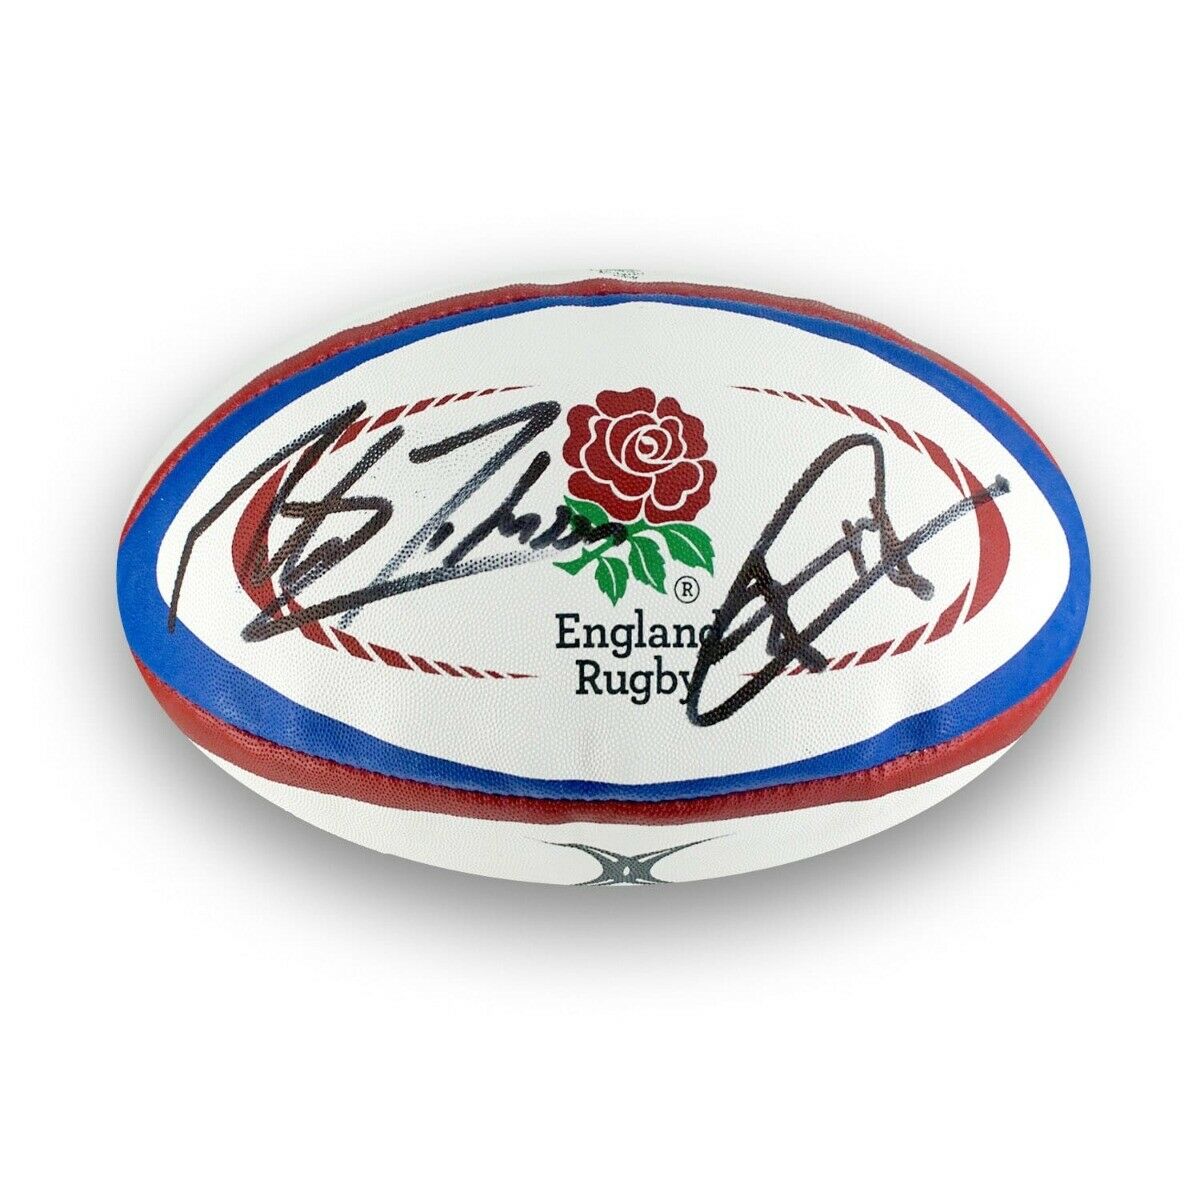 Martin Johnson And Jonny Wilkinson Signed England Rugby Ball